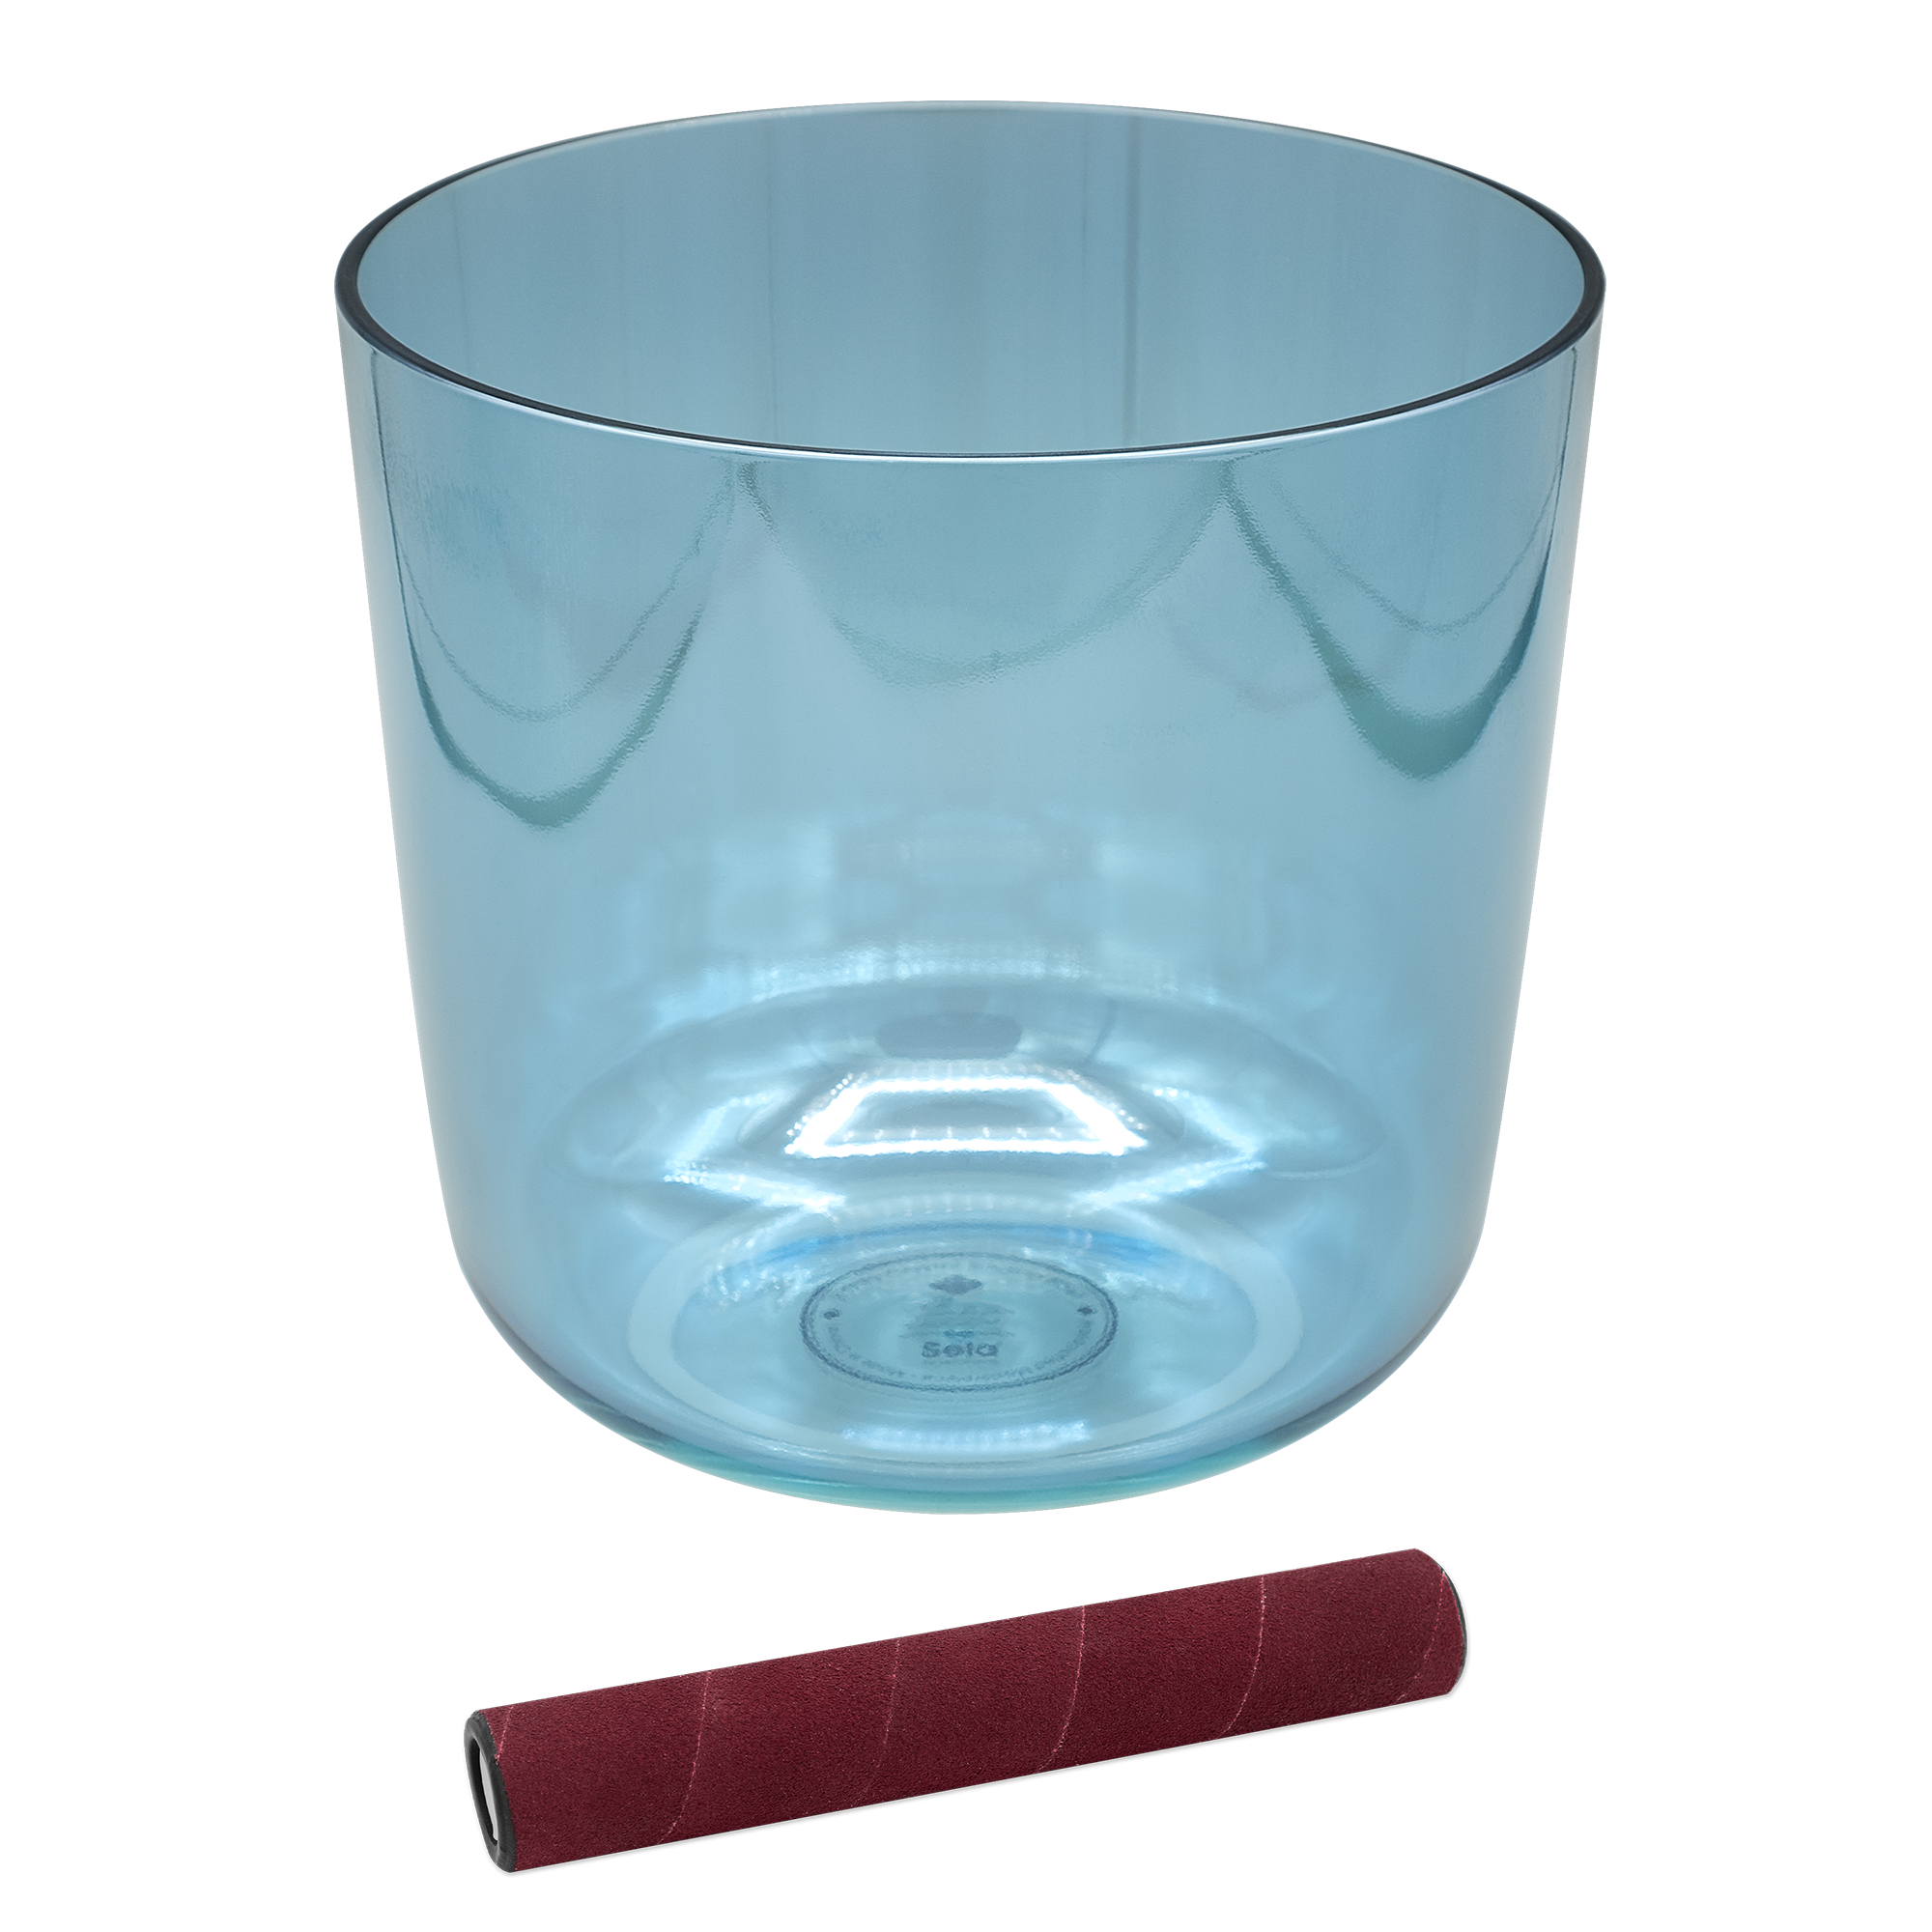 5.5” Infinity Crystal Singing Bowl in A4, 432 Hz, Blue